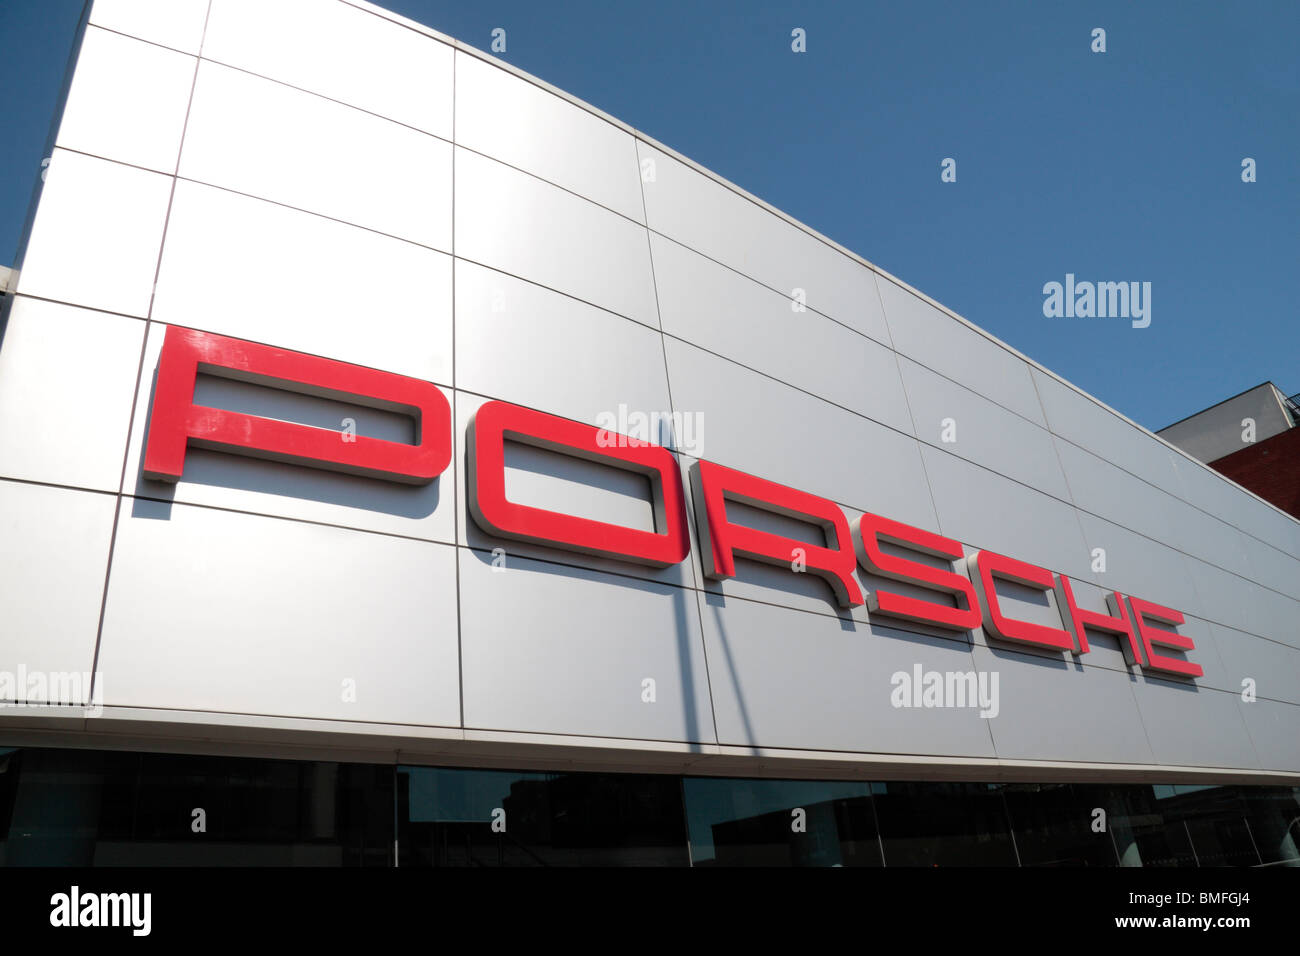 The Porsche logo on the shop front of the Stratford, East London branch. Stock Photo